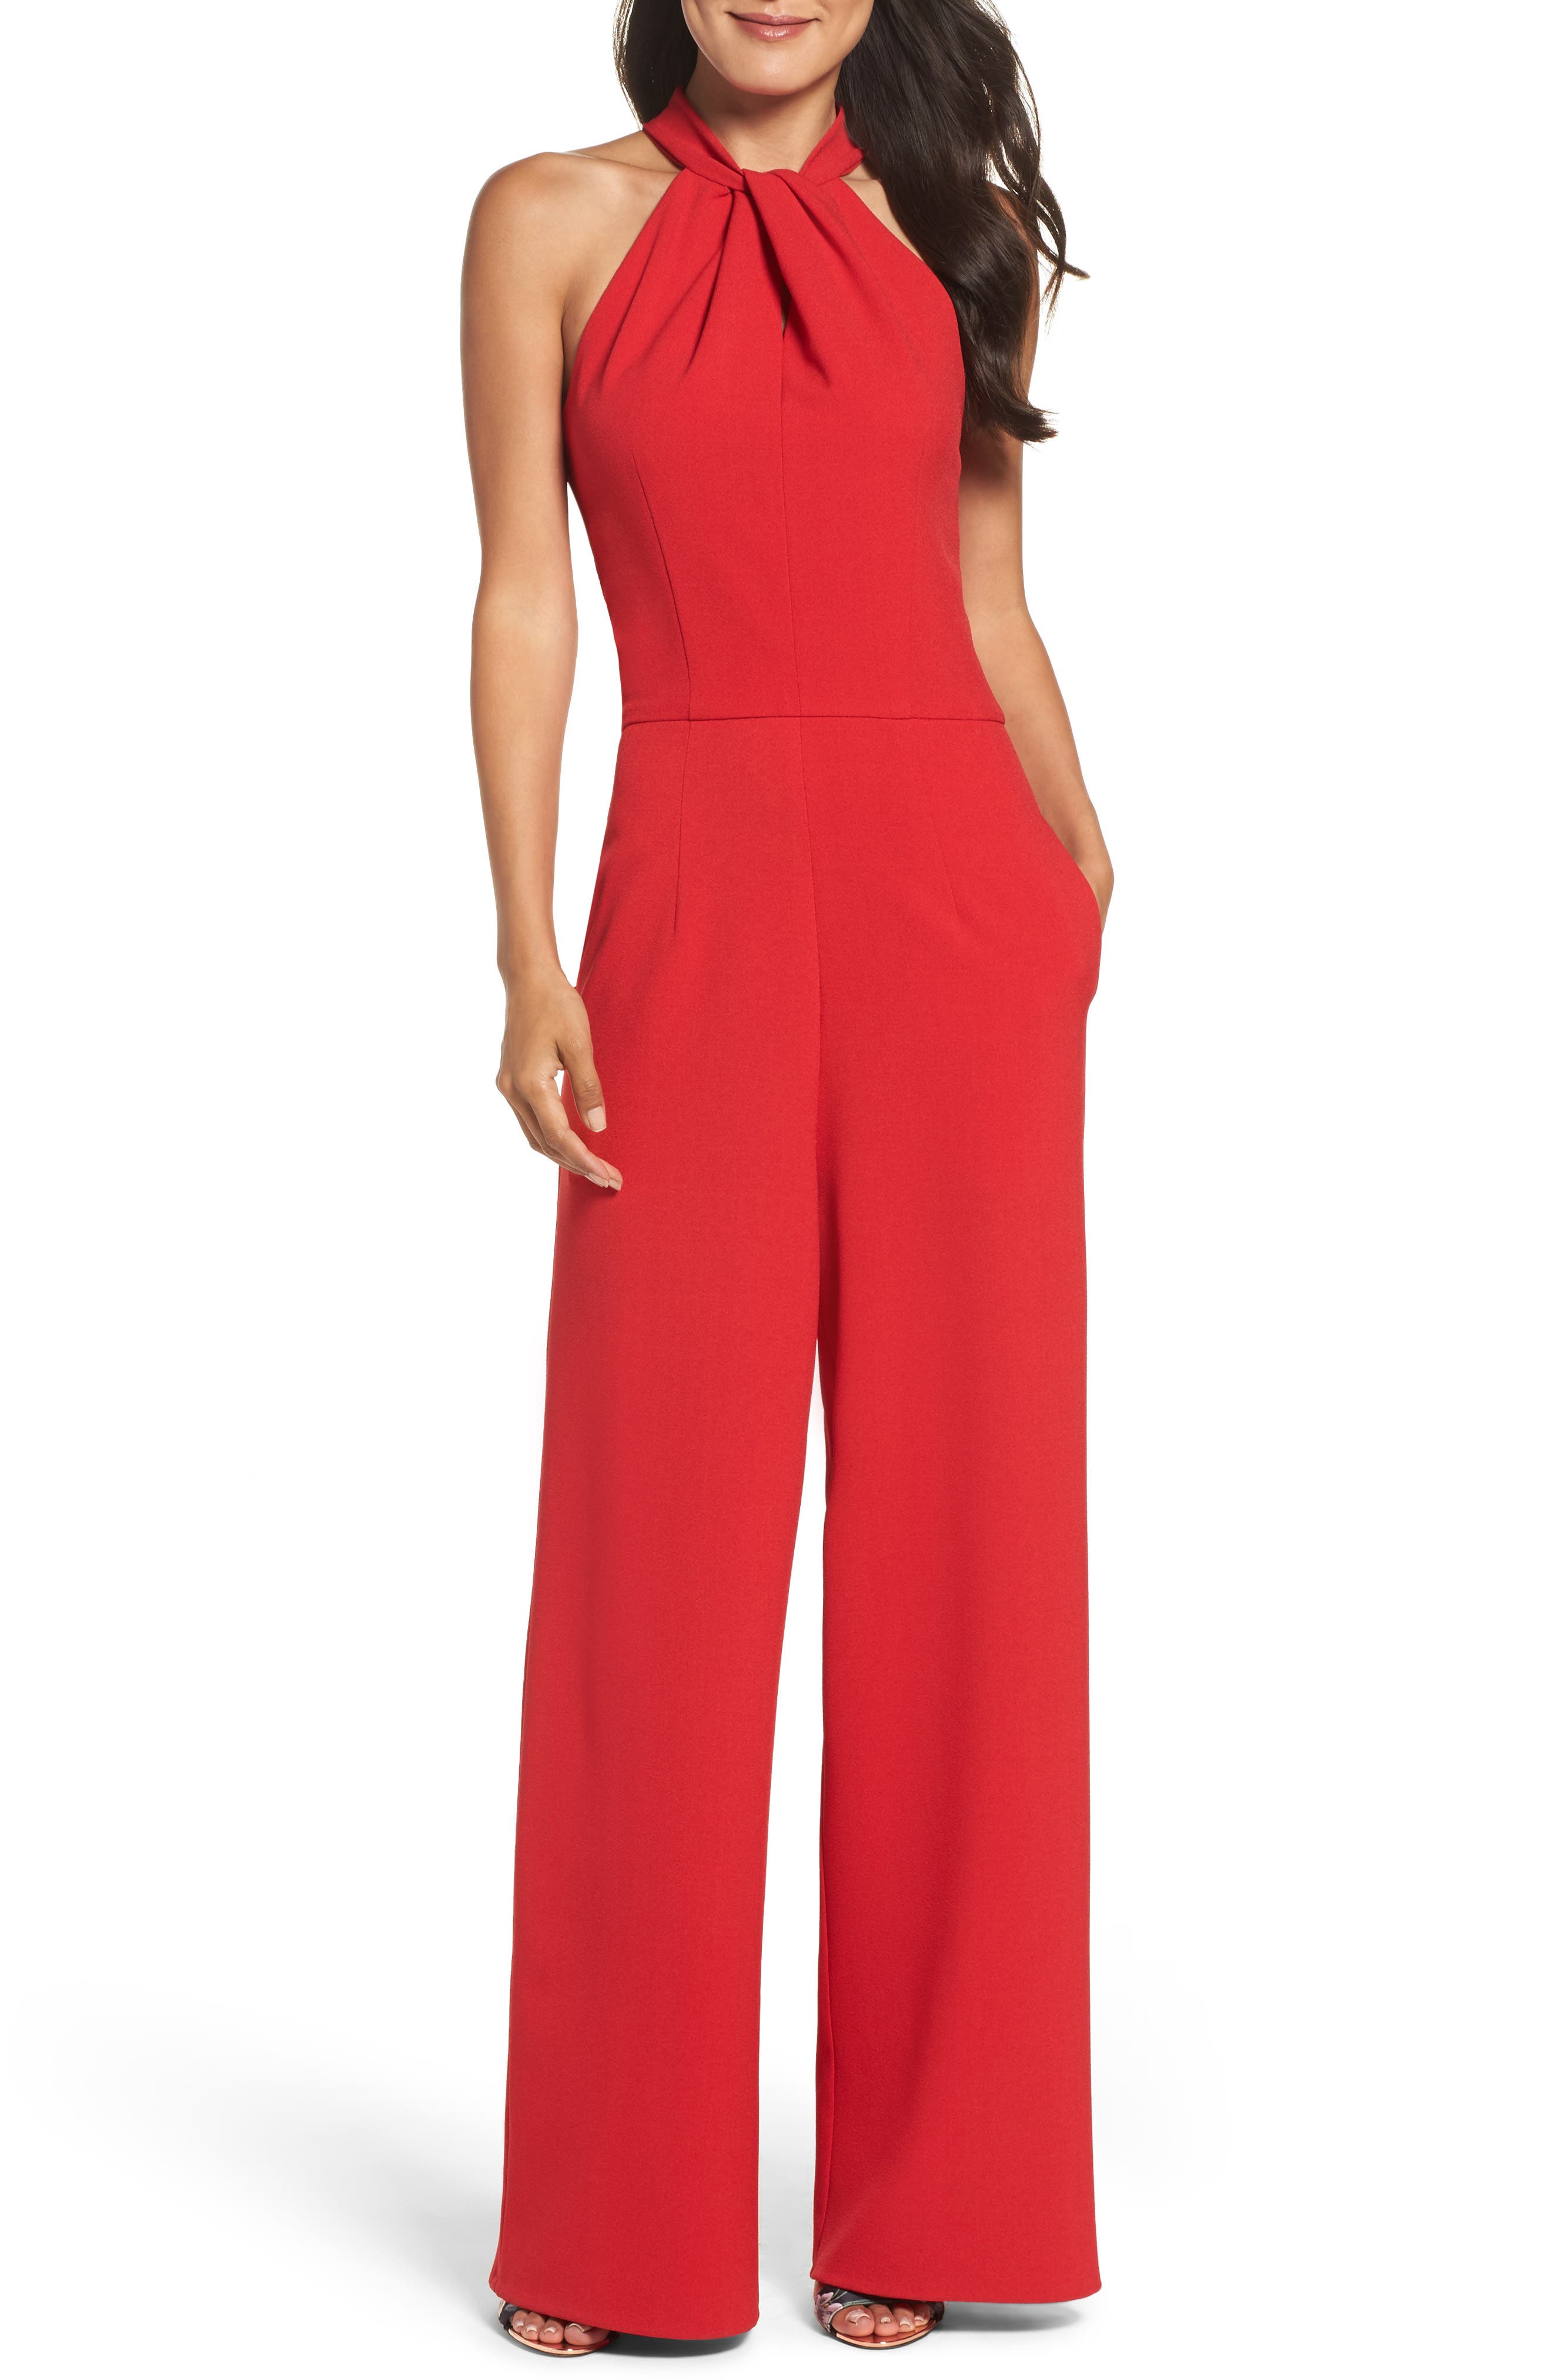 red jumpsuit for wedding